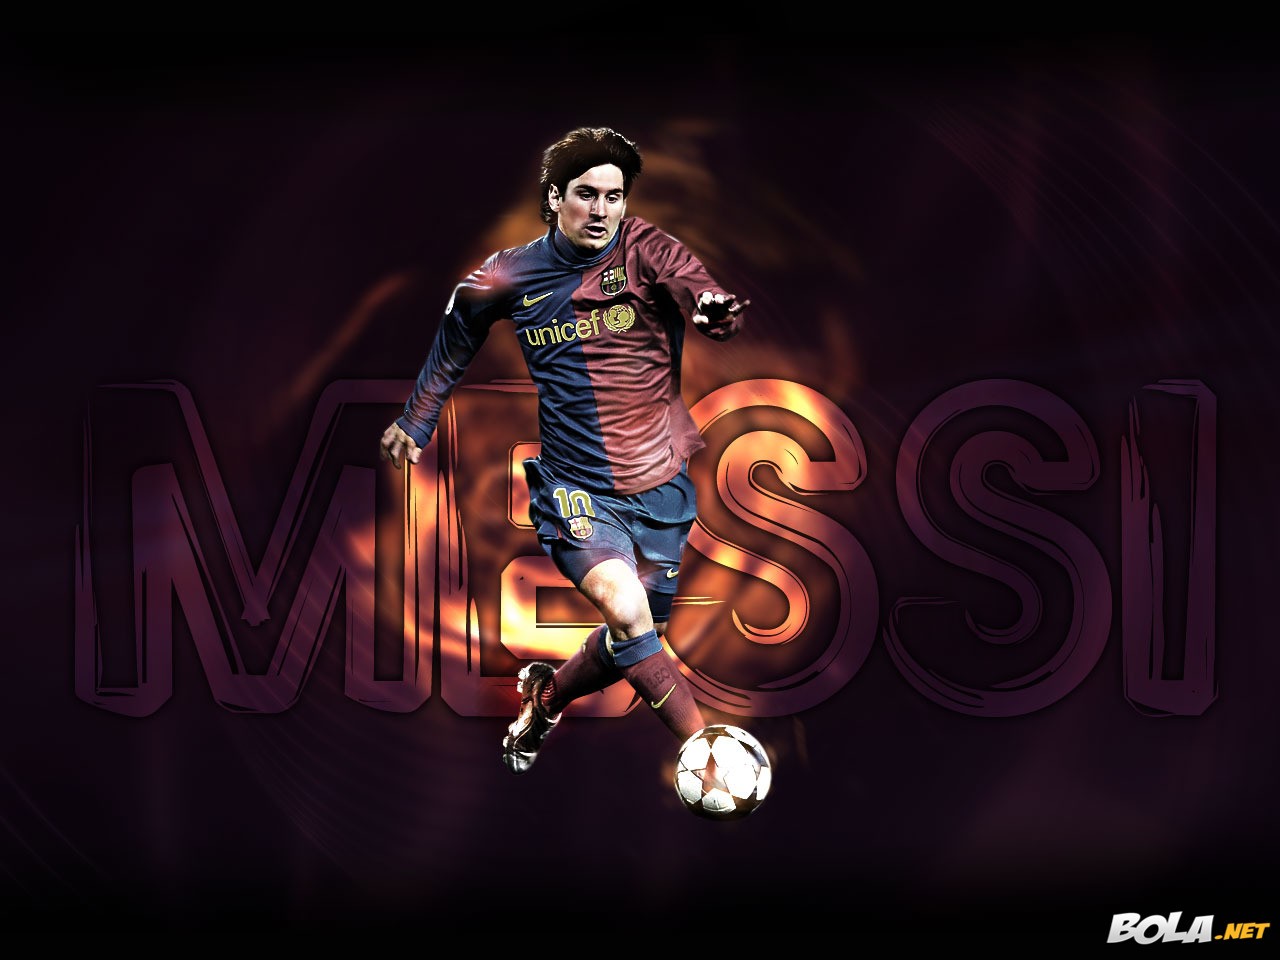 Image For Amazing Lionel Messi Wallpapers Download - HD Wallpaper 